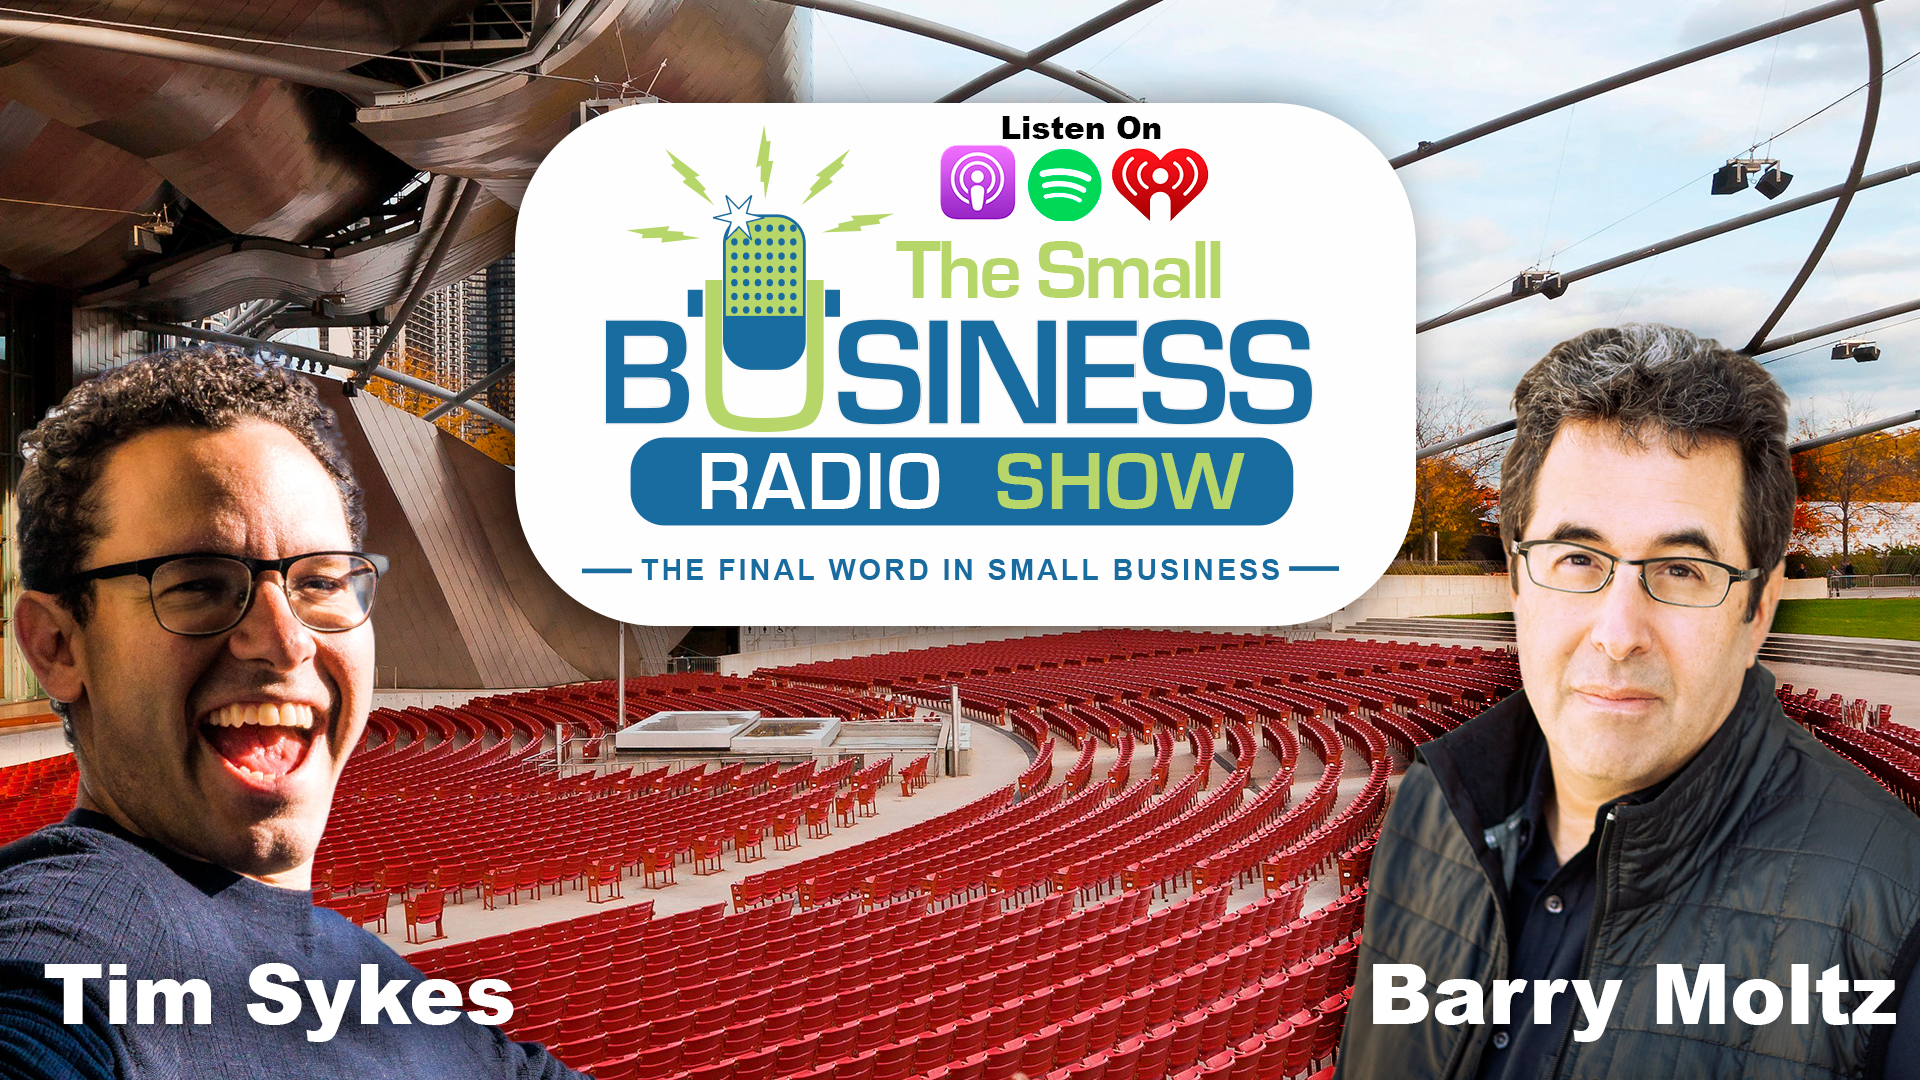 Tim Sykes on The Small Business Radio Show